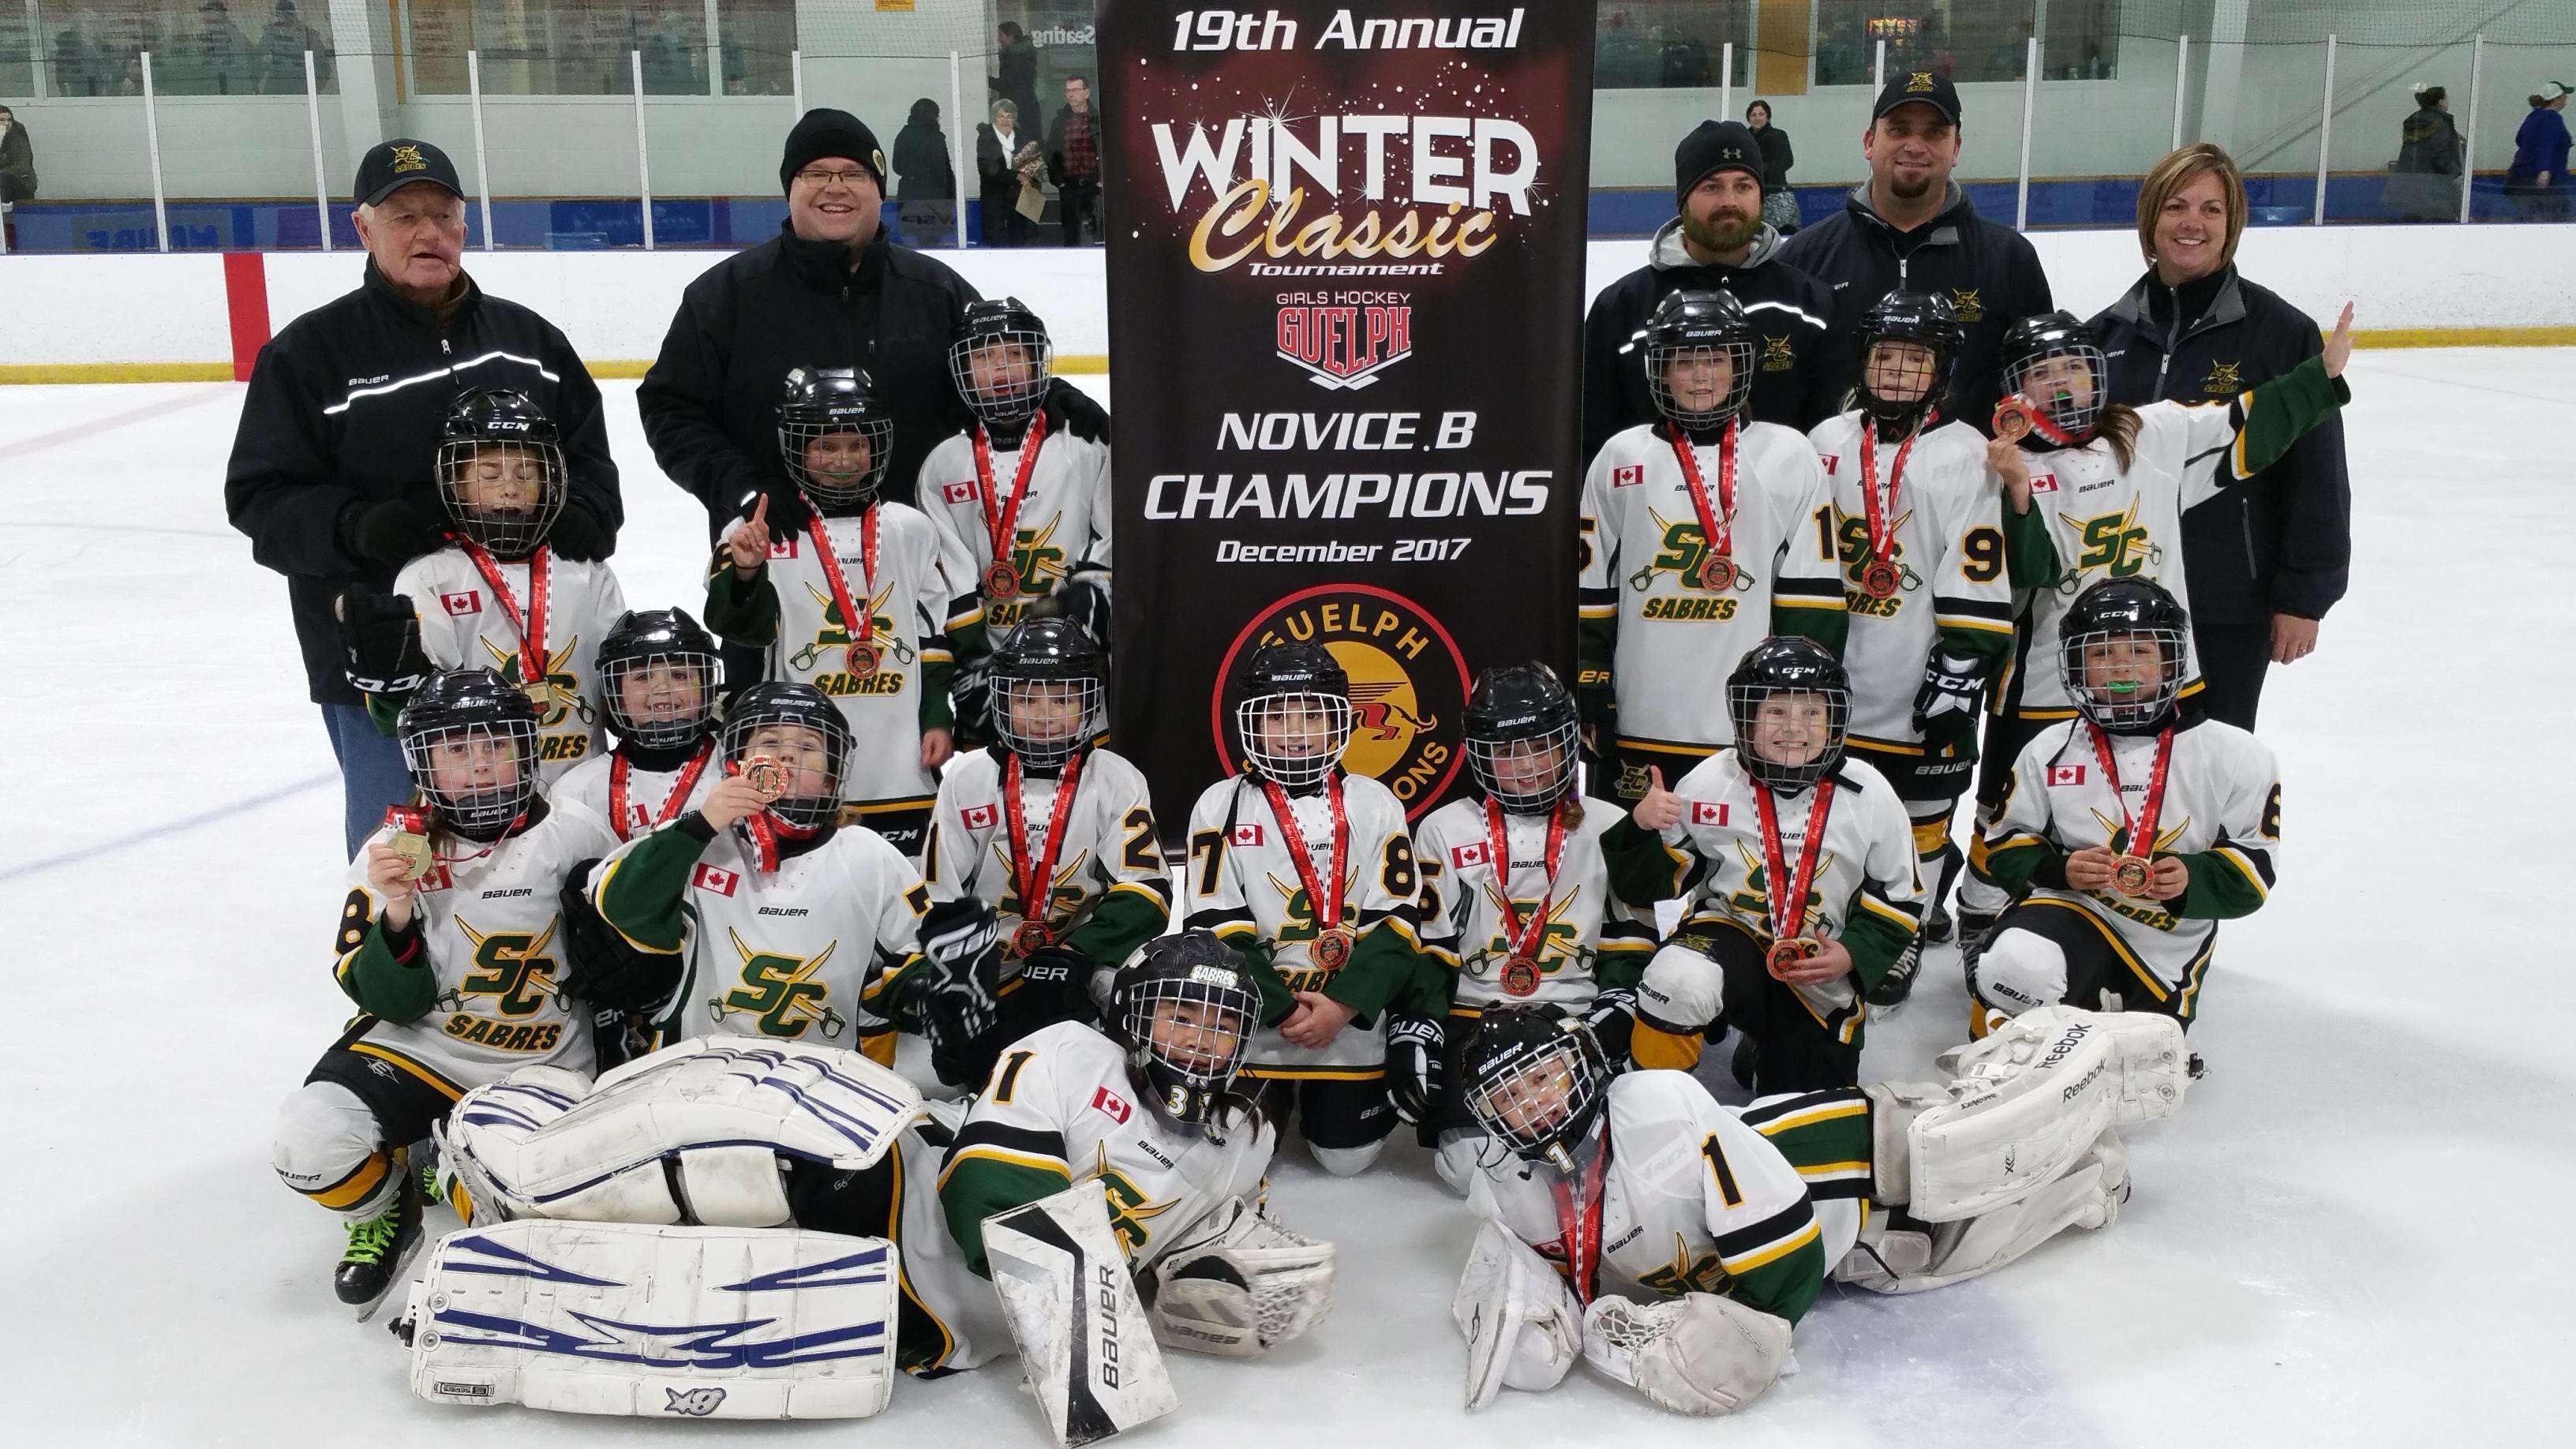 Novice B - Guelph Winter Classic - Gold Medalists